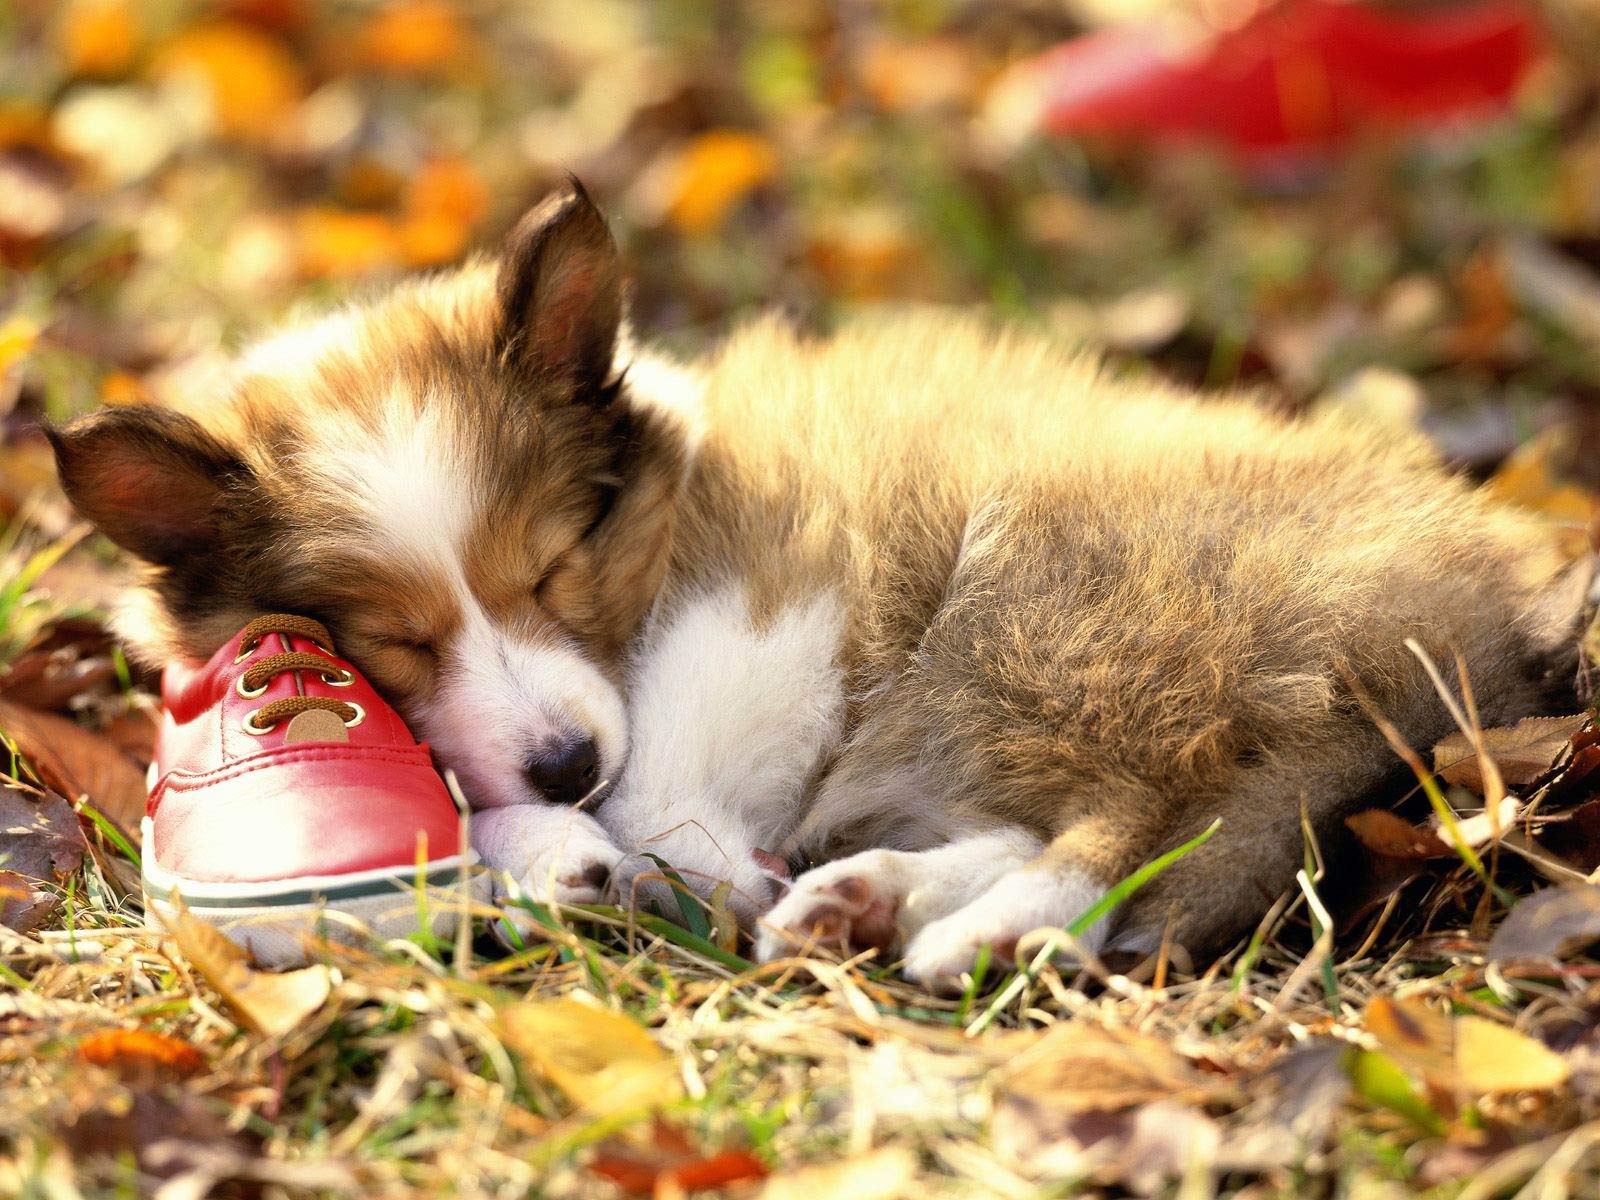 TipTop 3D & HD Wallpapers Collection: Beautiful Dogs Wallpapers